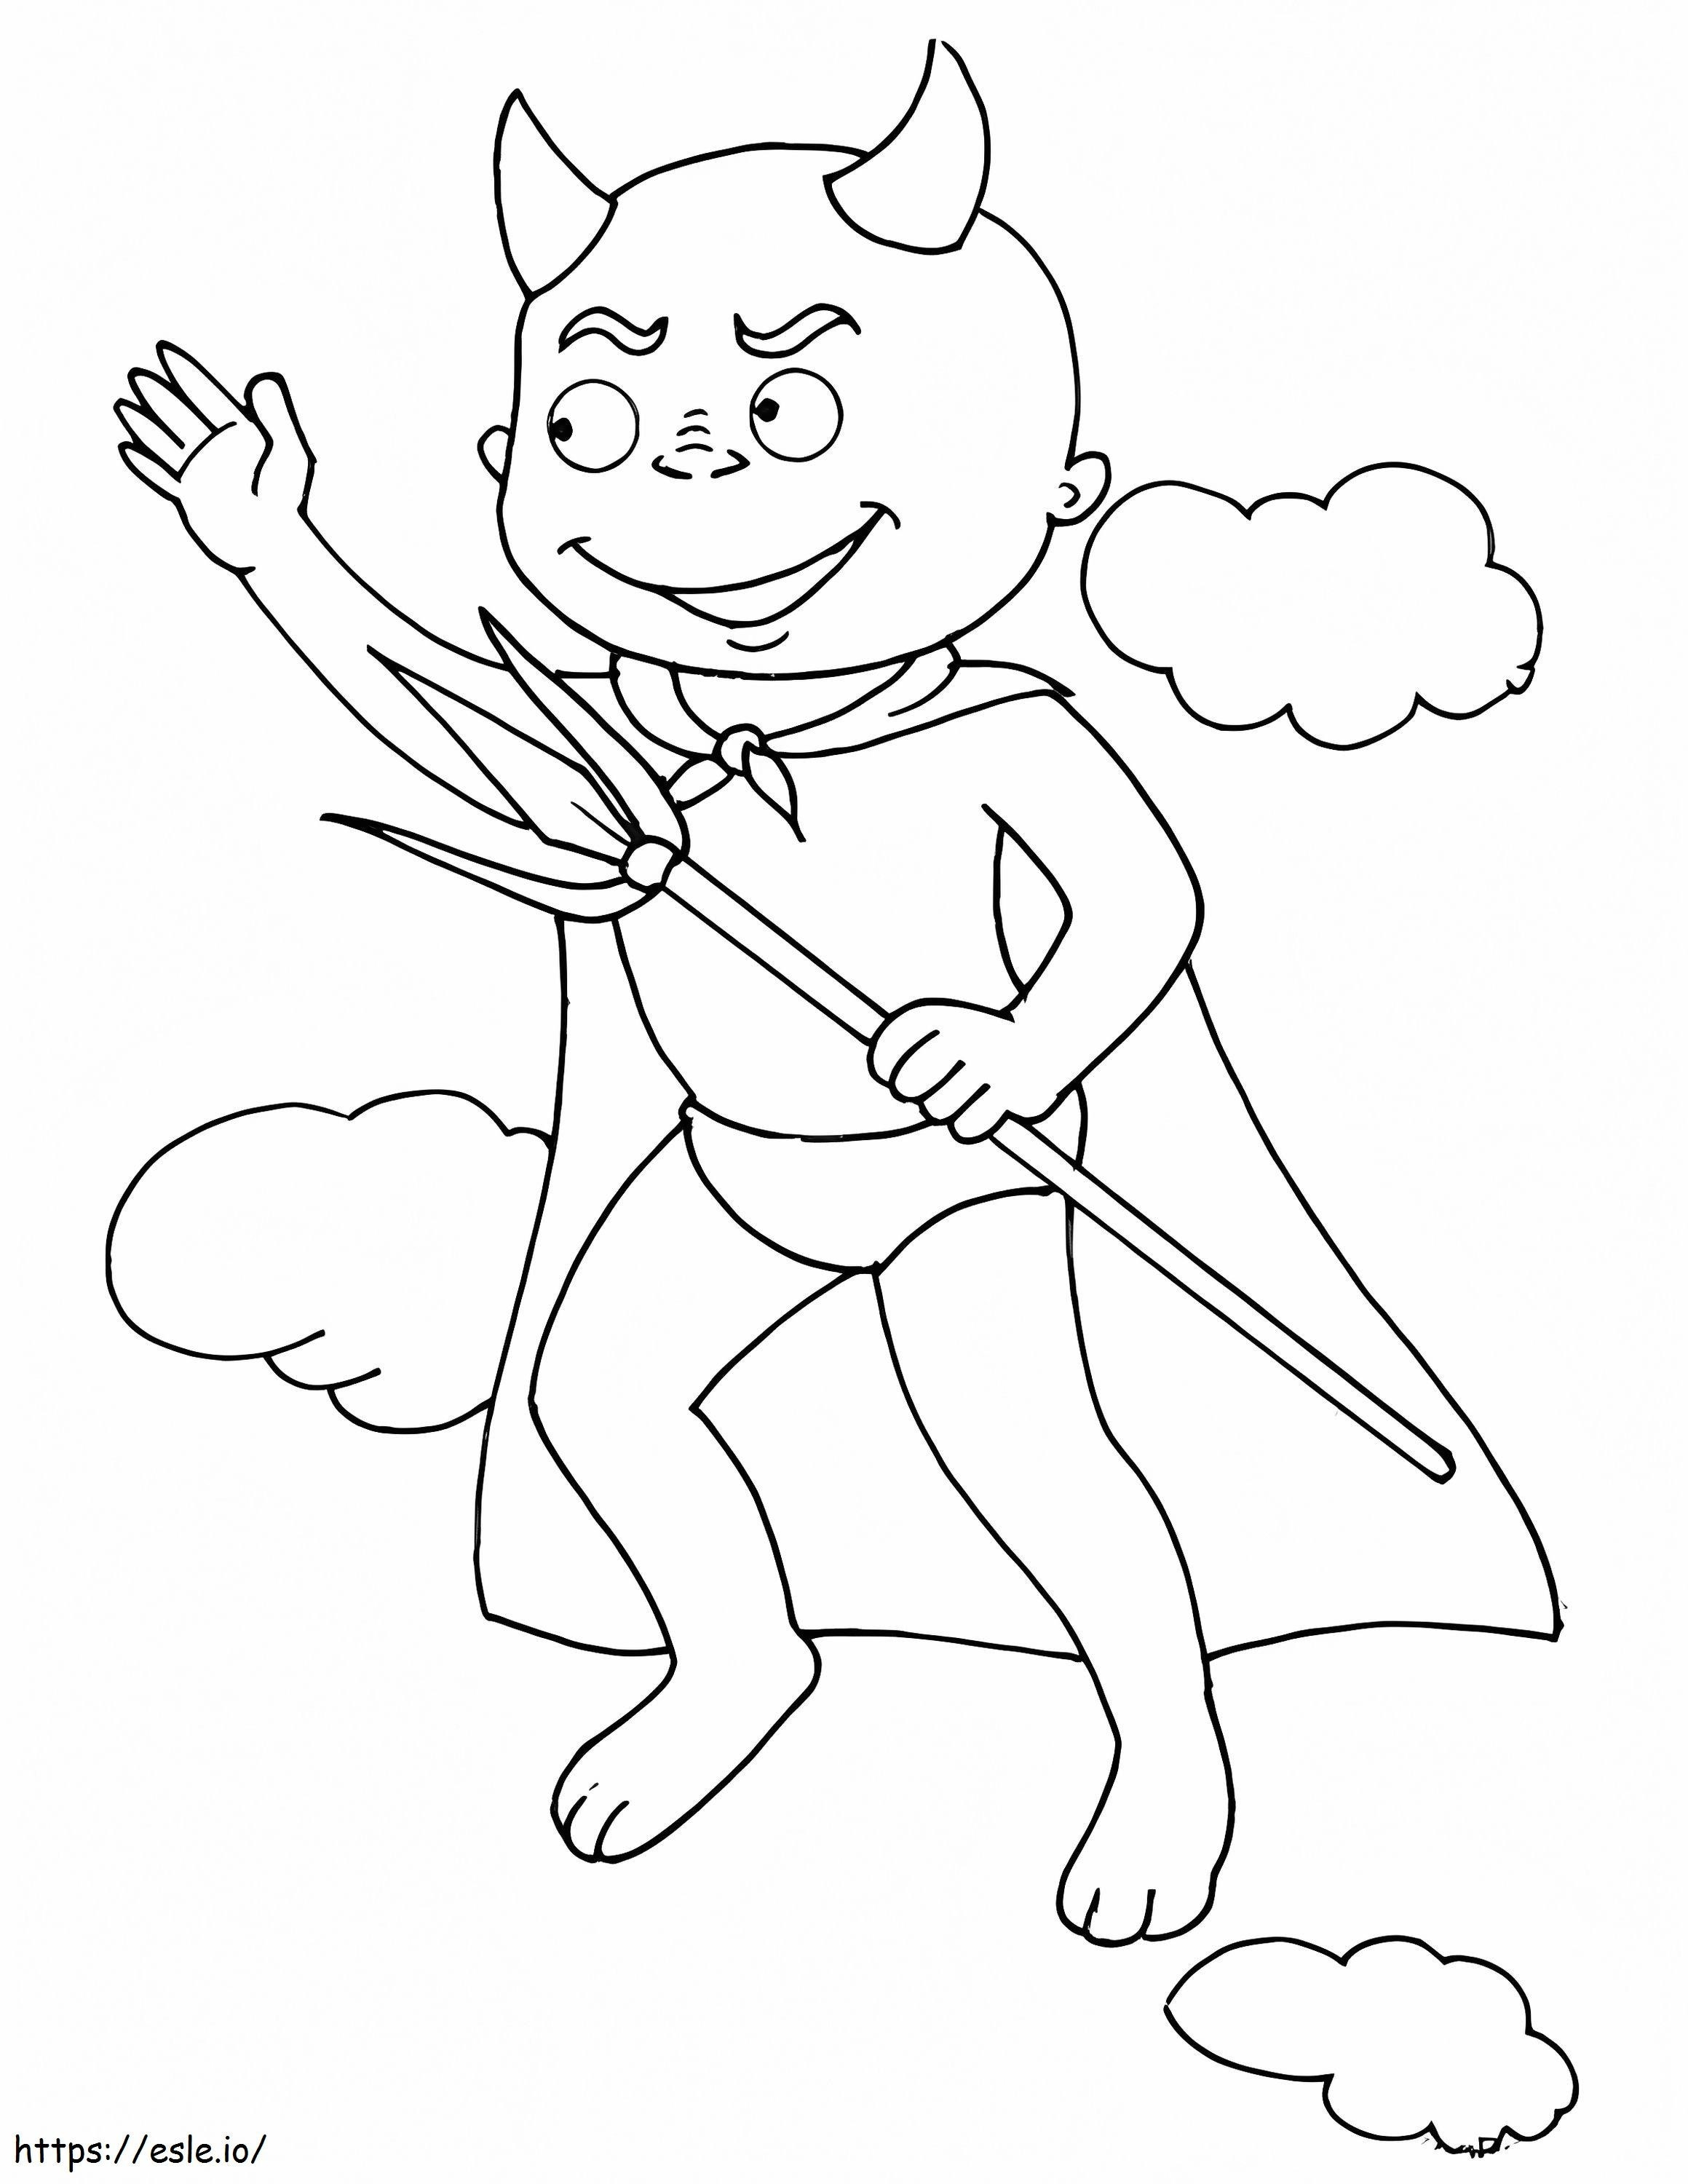 Funny Devil coloring page